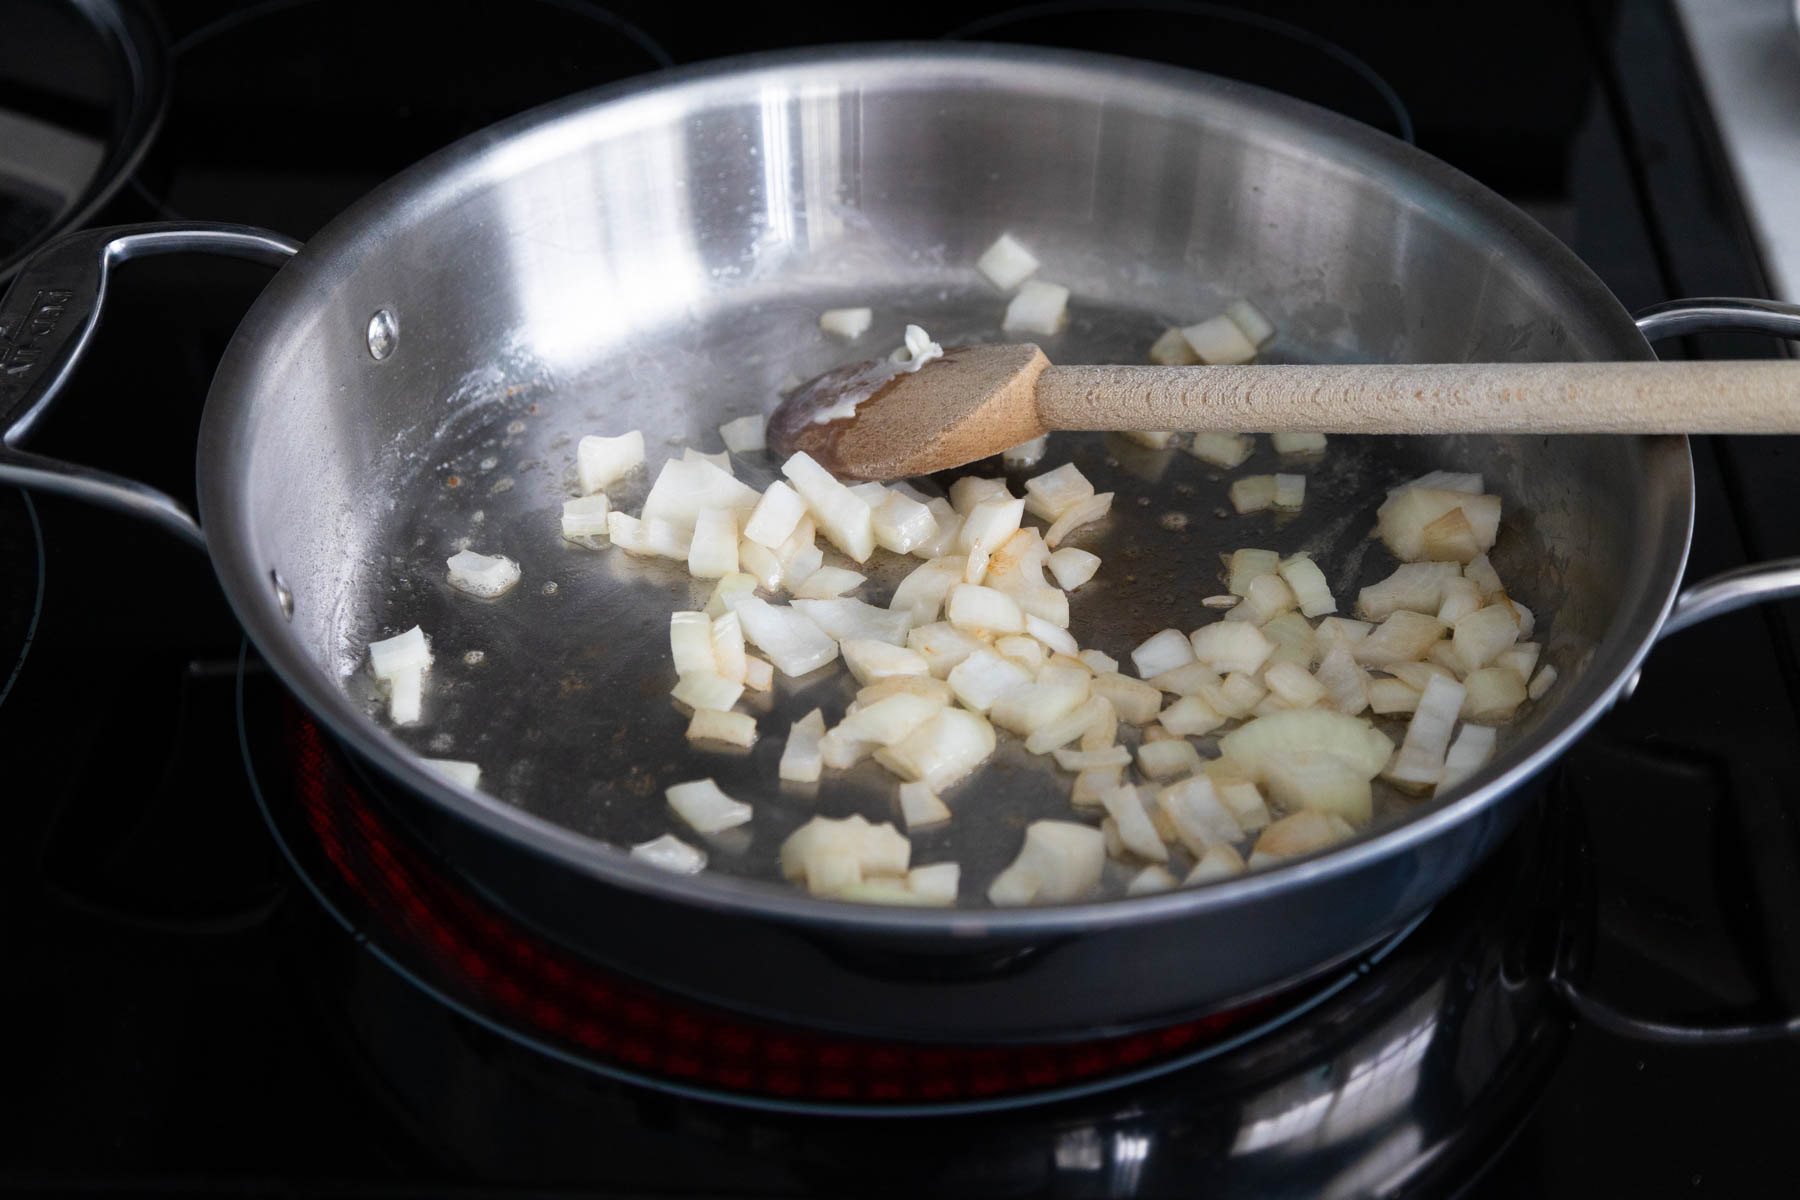 The chopped onion is in a large skillet with melted butter.